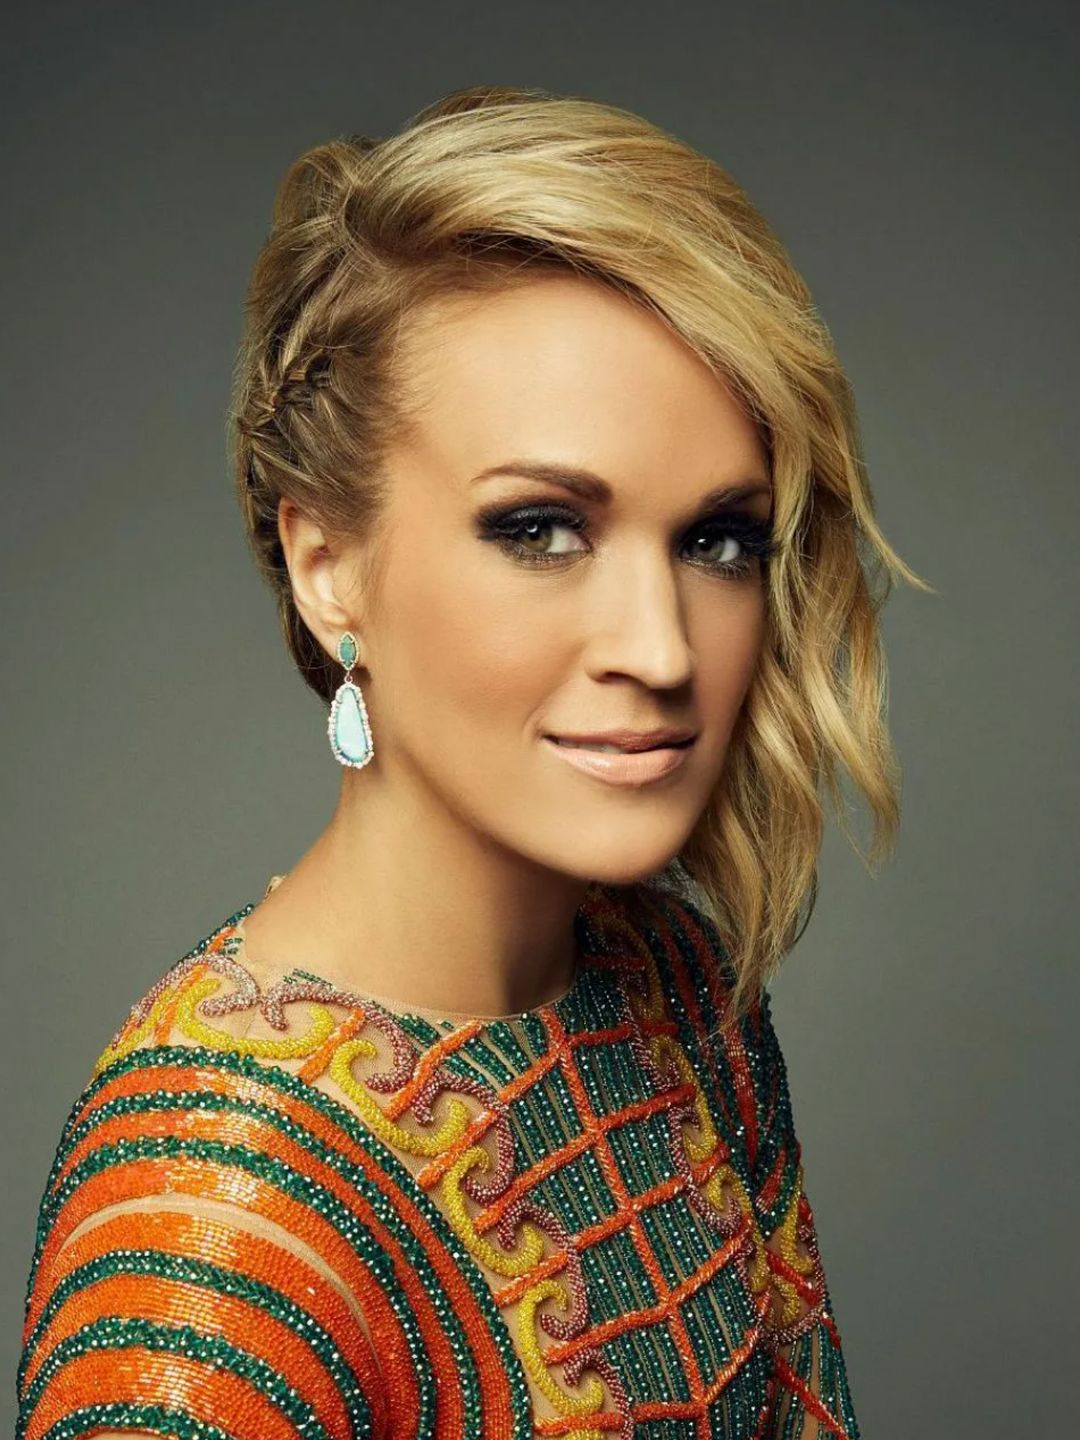 Carrie Underwood story of success